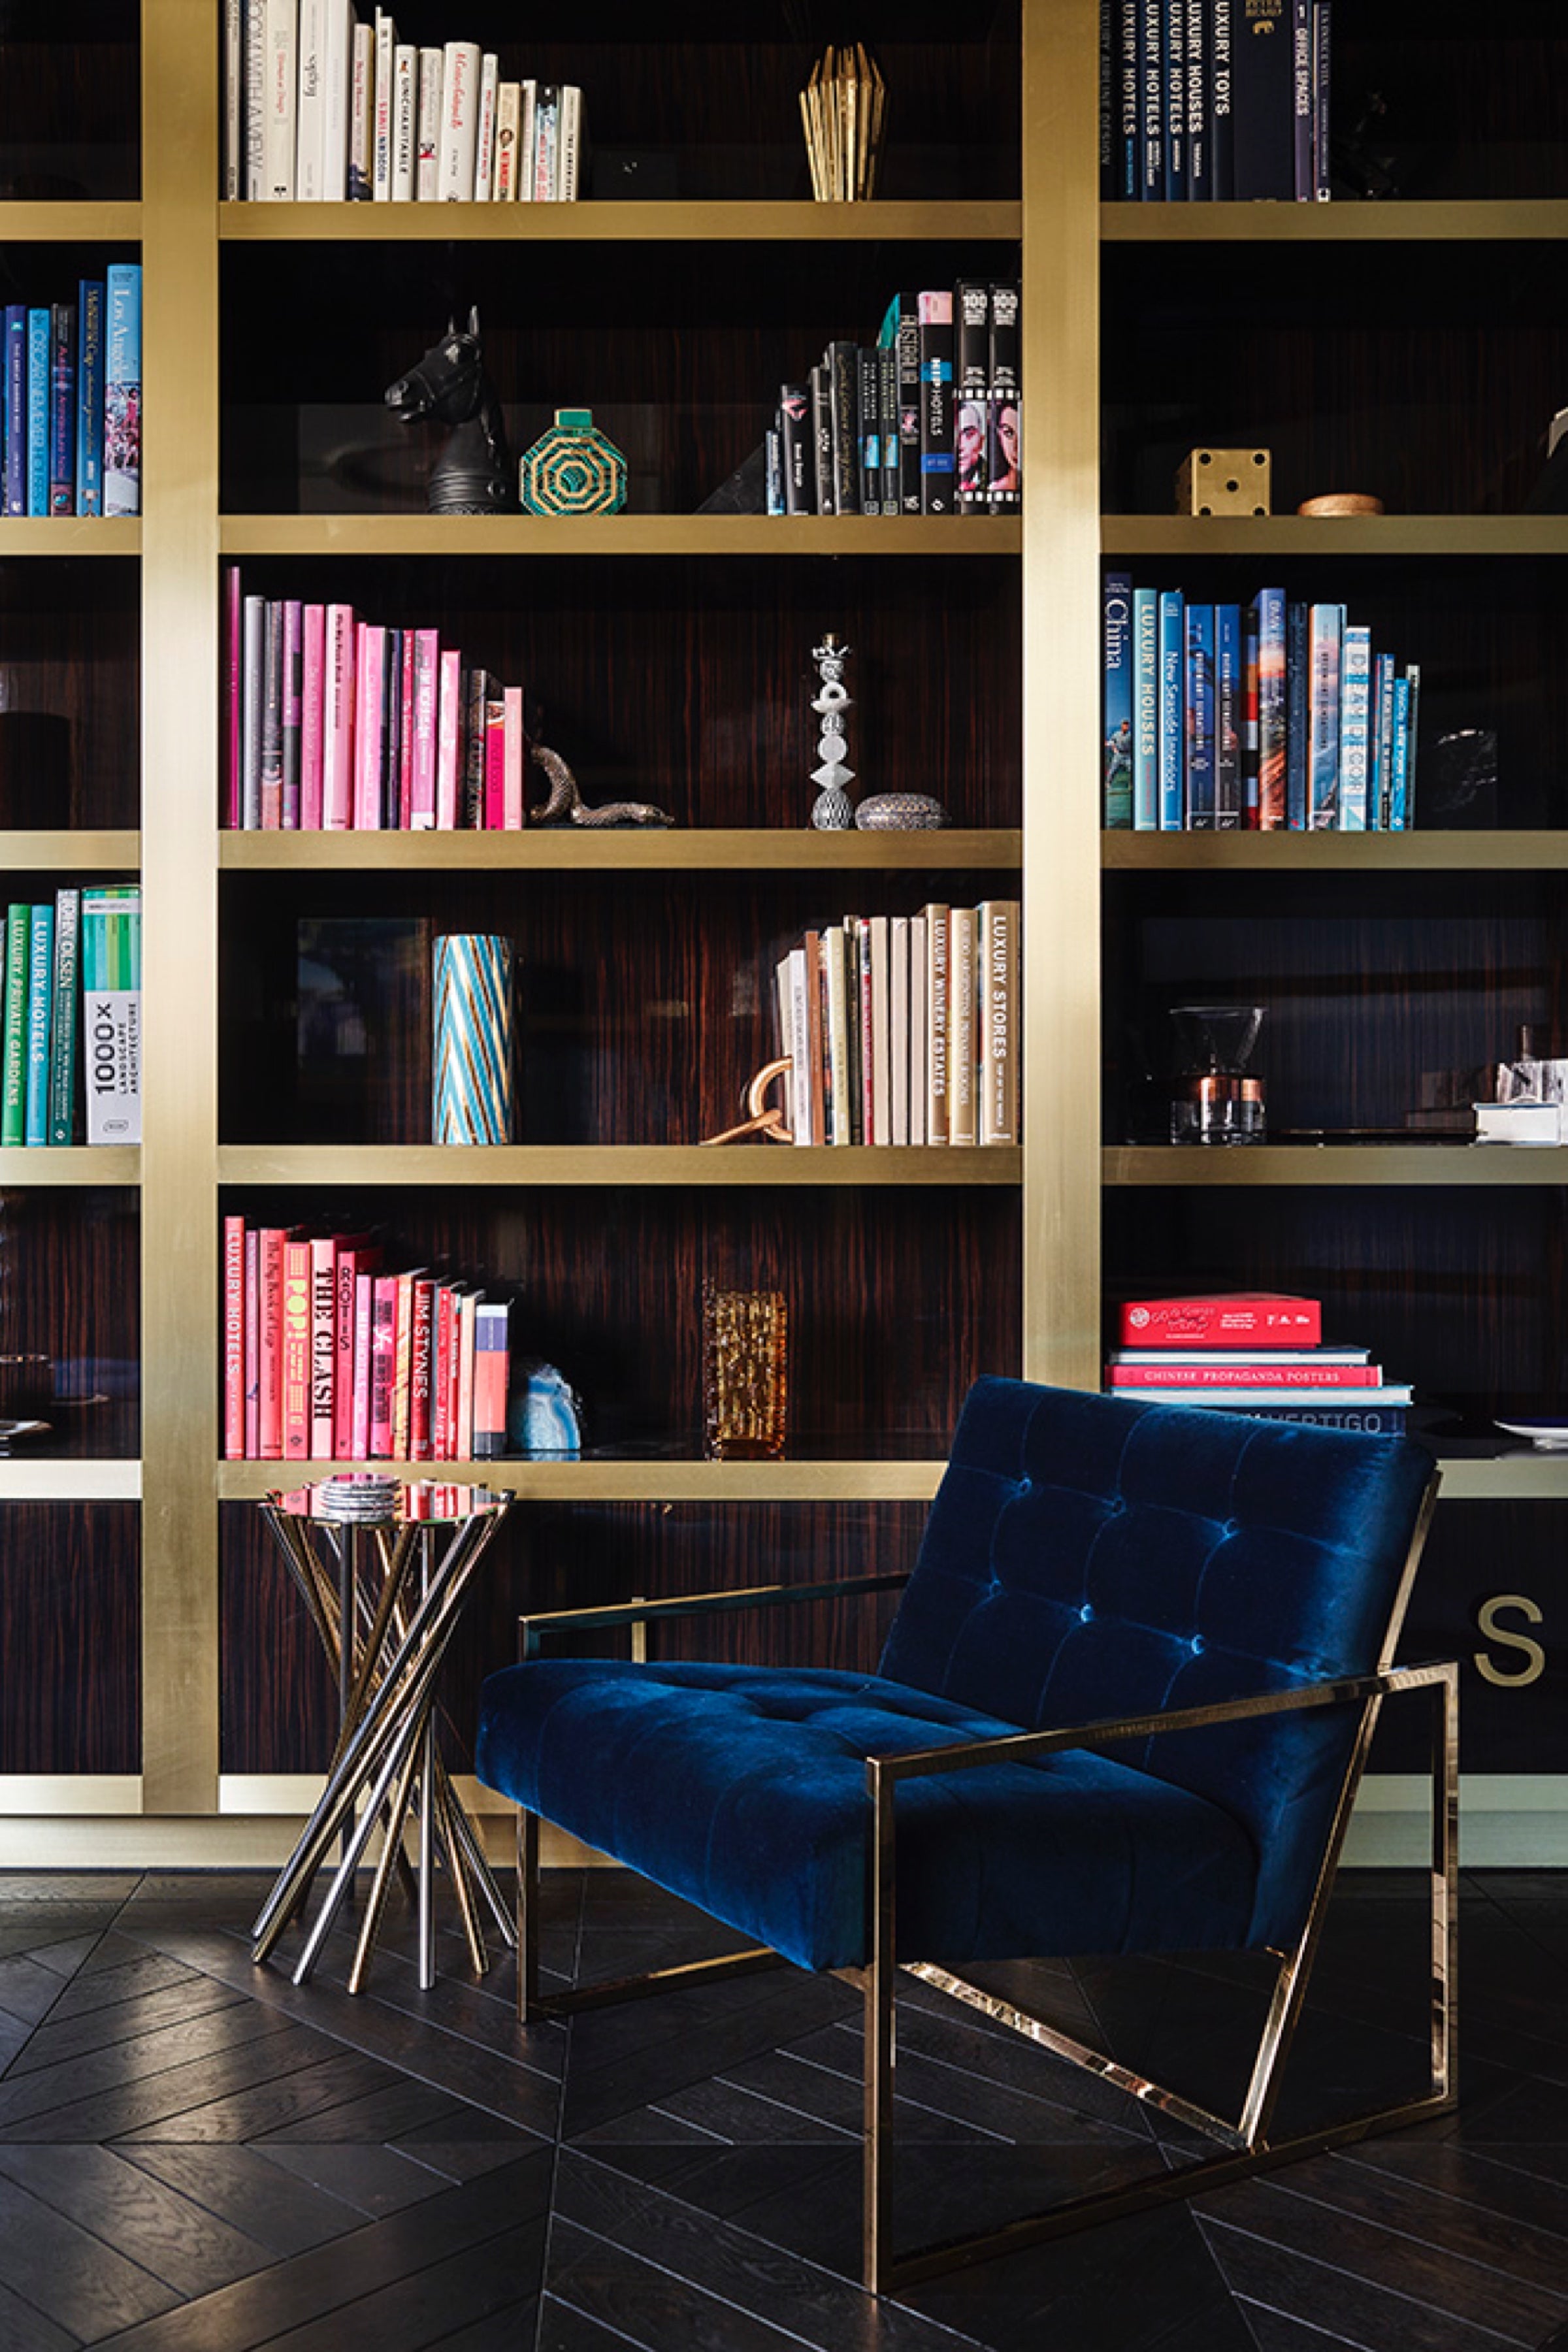 Blue and gold chair in front of bookcase